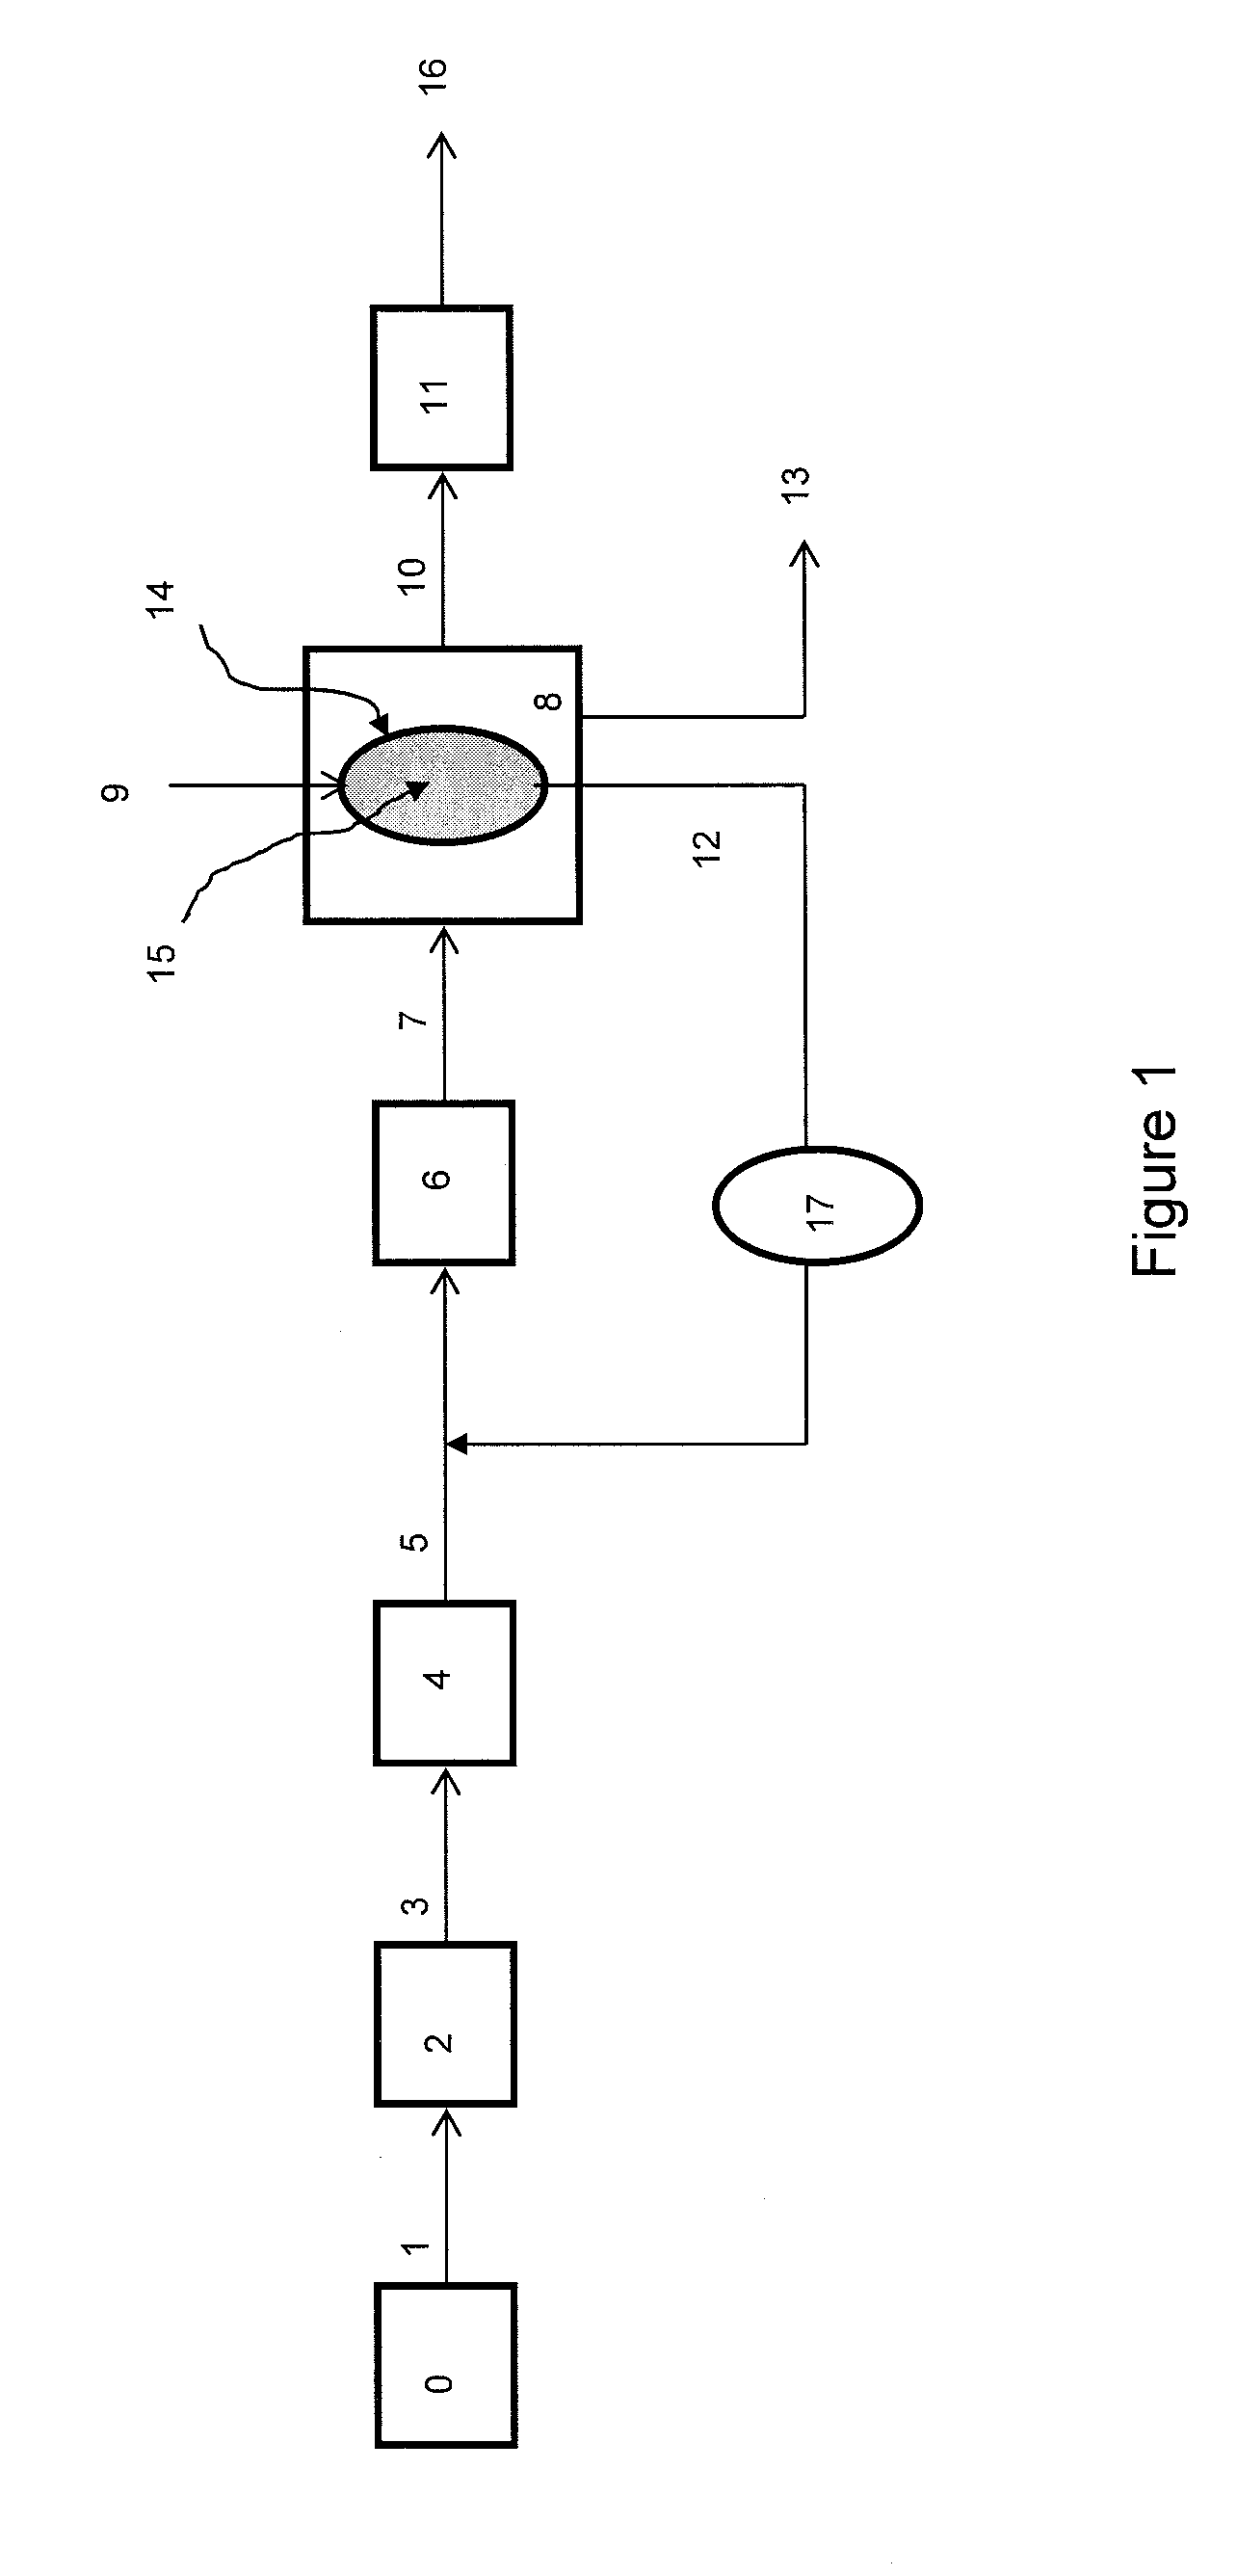 Process For The Production Of Hydrogen And Carbon Dioxide Utilizing Dry Magnesium Based Sorbents In A Fixed Bed